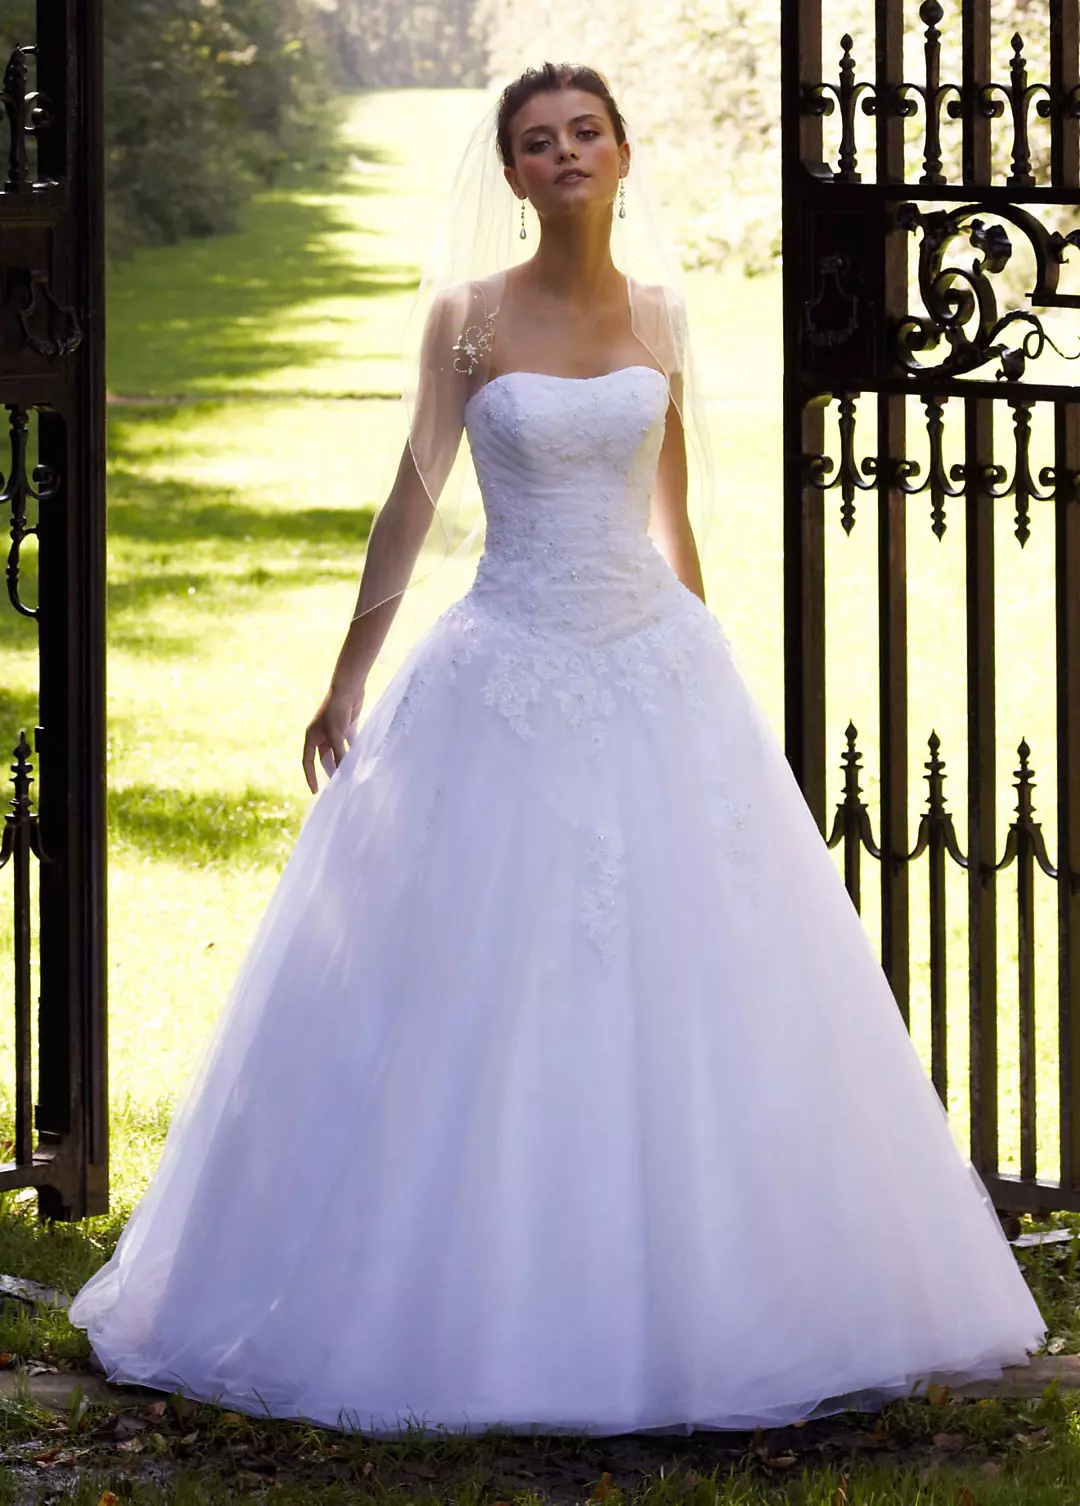 Strapless Tulle Ball Gown with Lace Embellishments Image